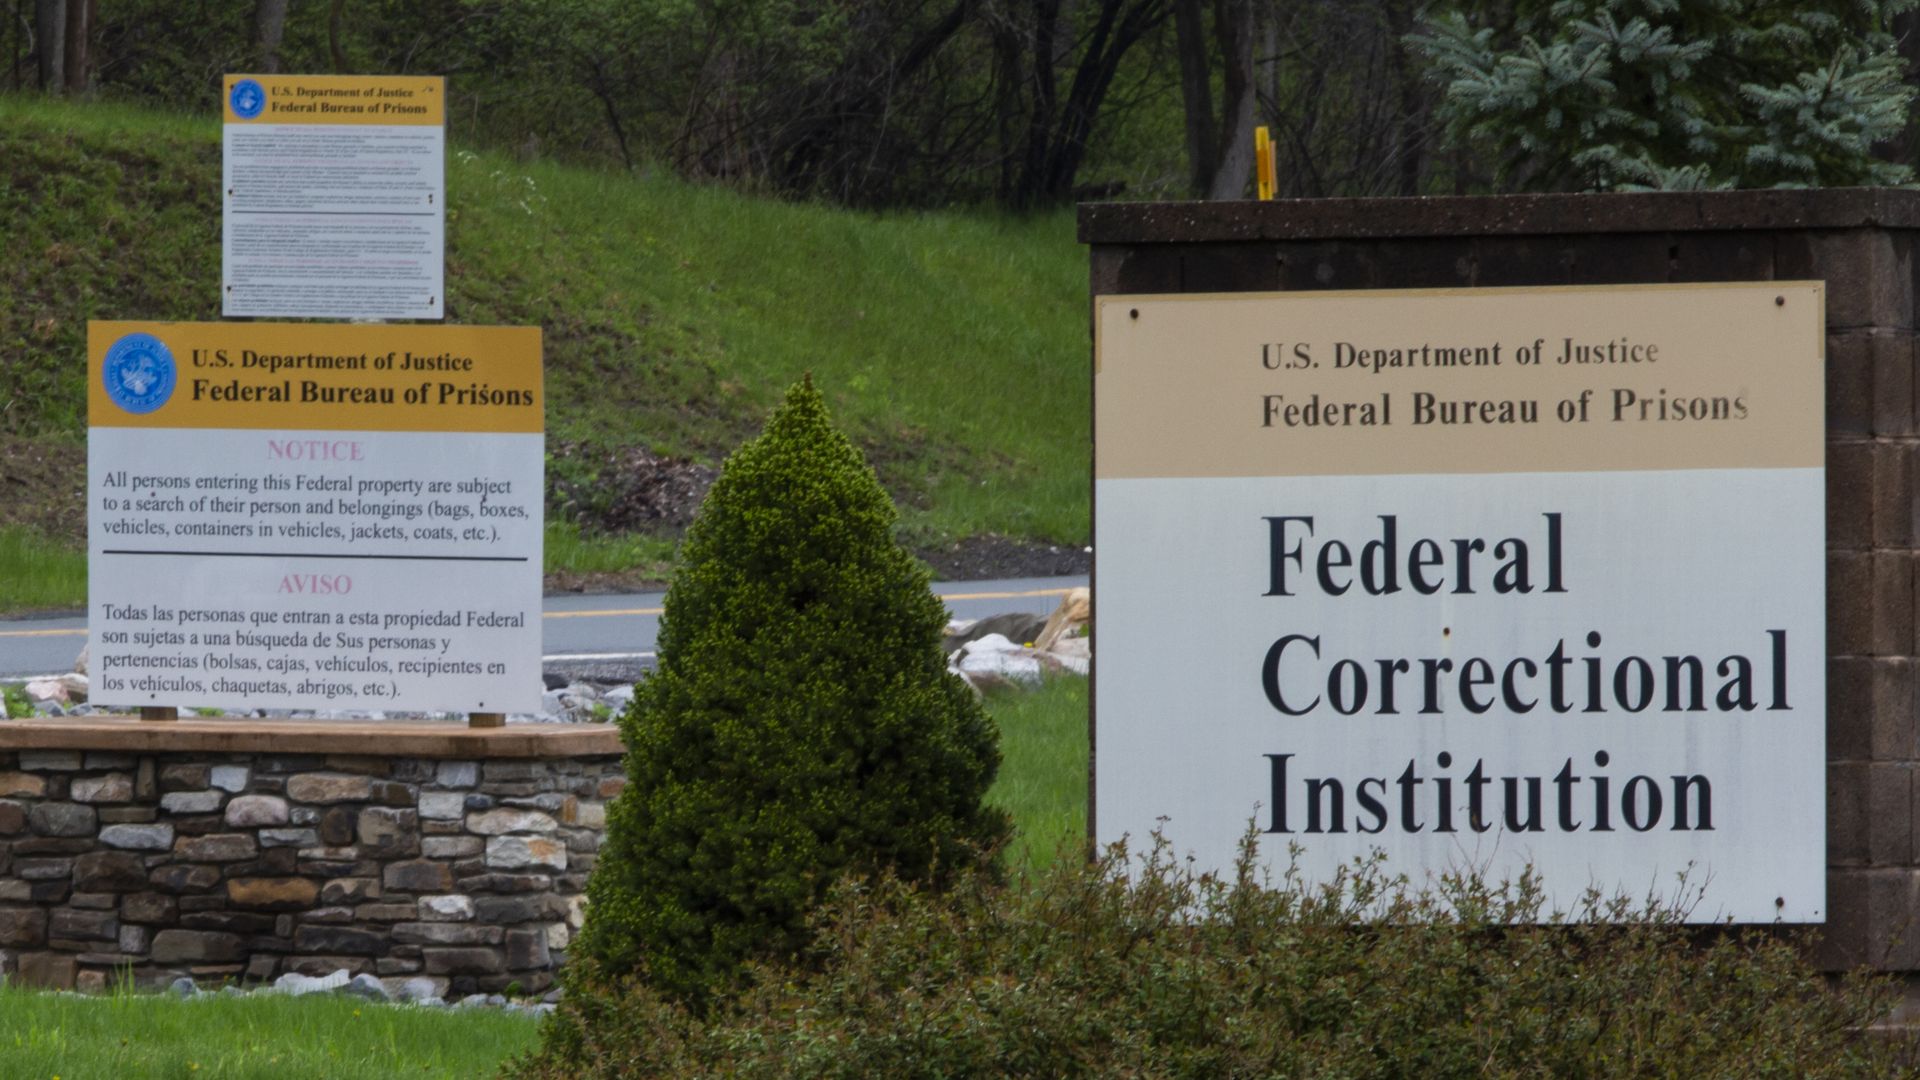 The entrance to the Federal Correctional Institution in Otisville, New York, 